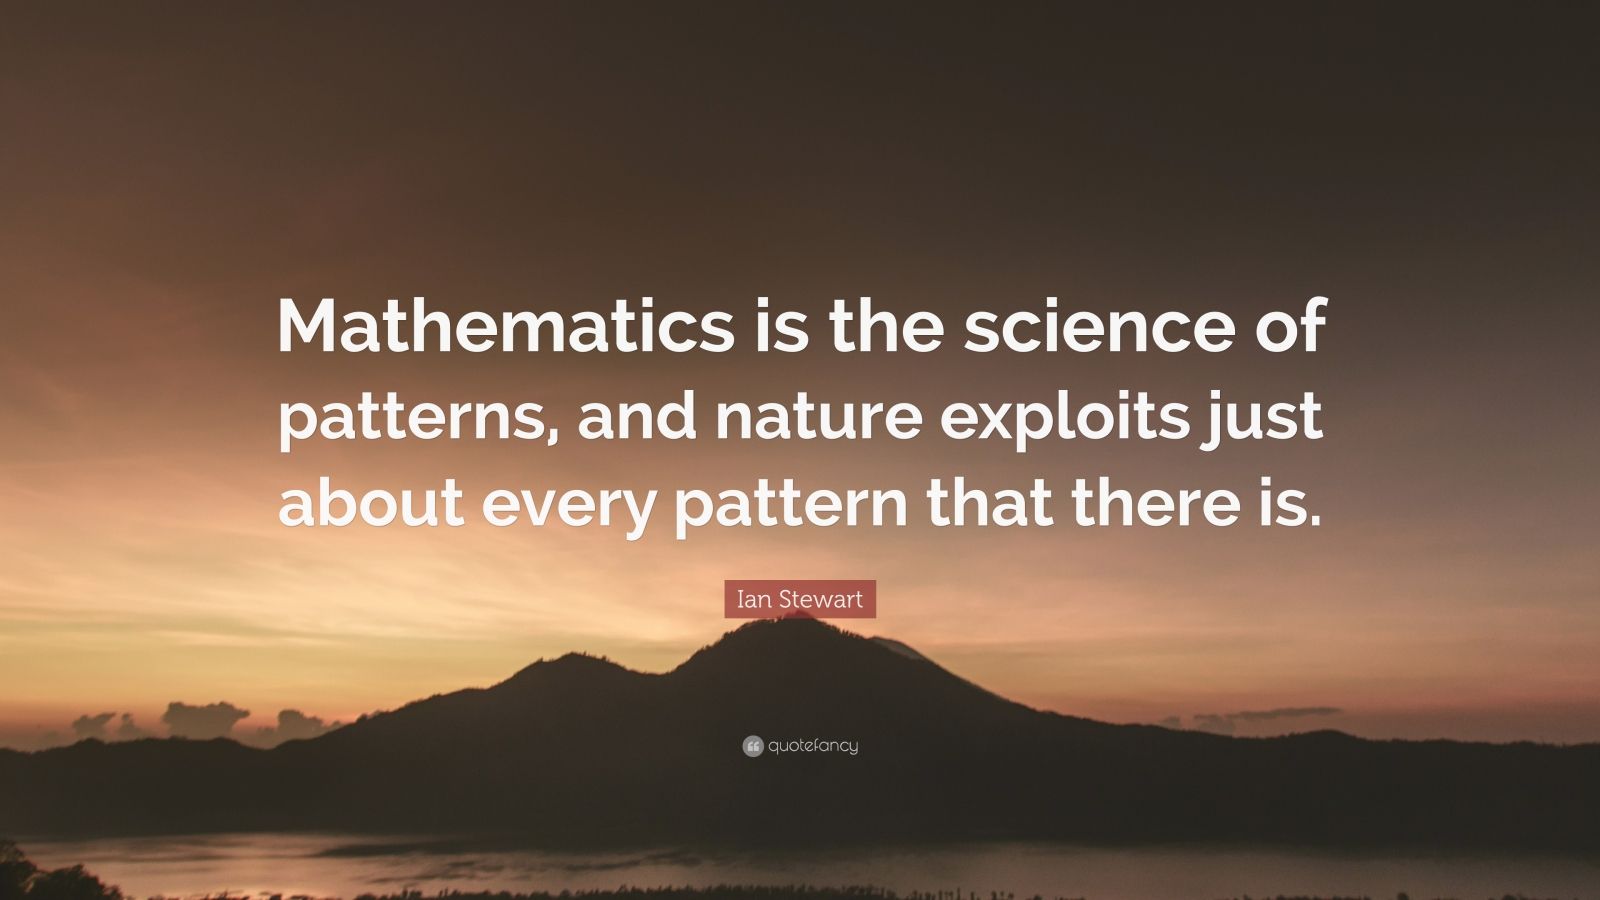 Ian Stewart Quote: “Mathematics is the science of patterns, and nature